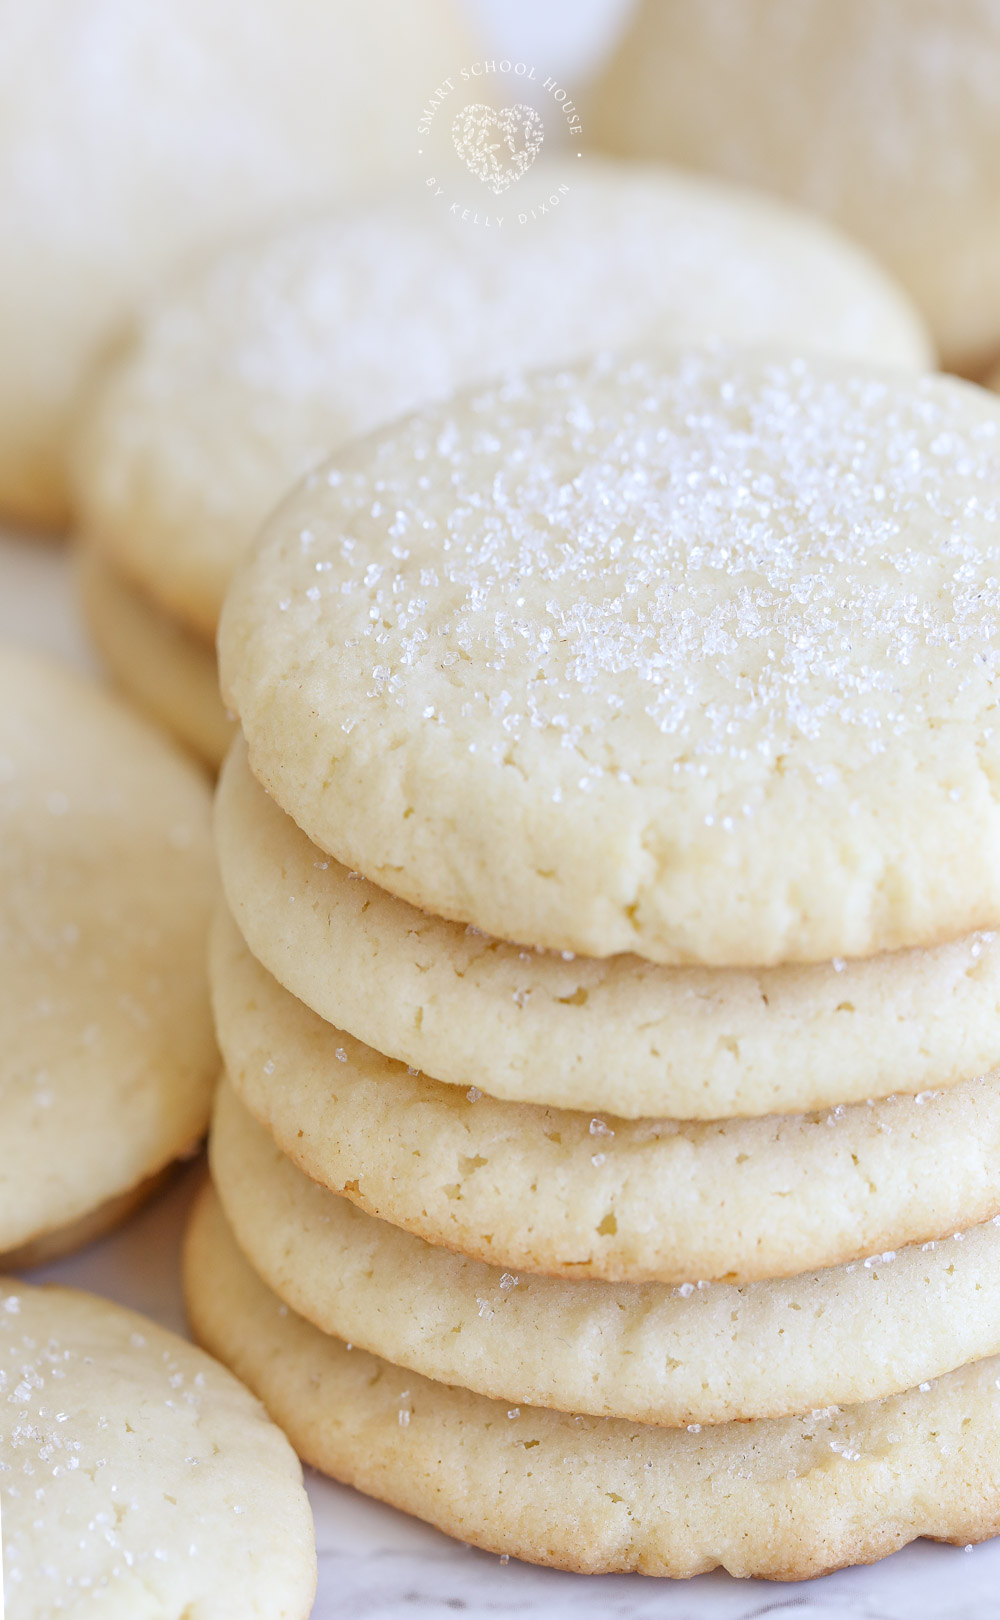 The BEST Sugar Cookies Ever! With crisp edges, thick and soft centers, they melt in your mouth!